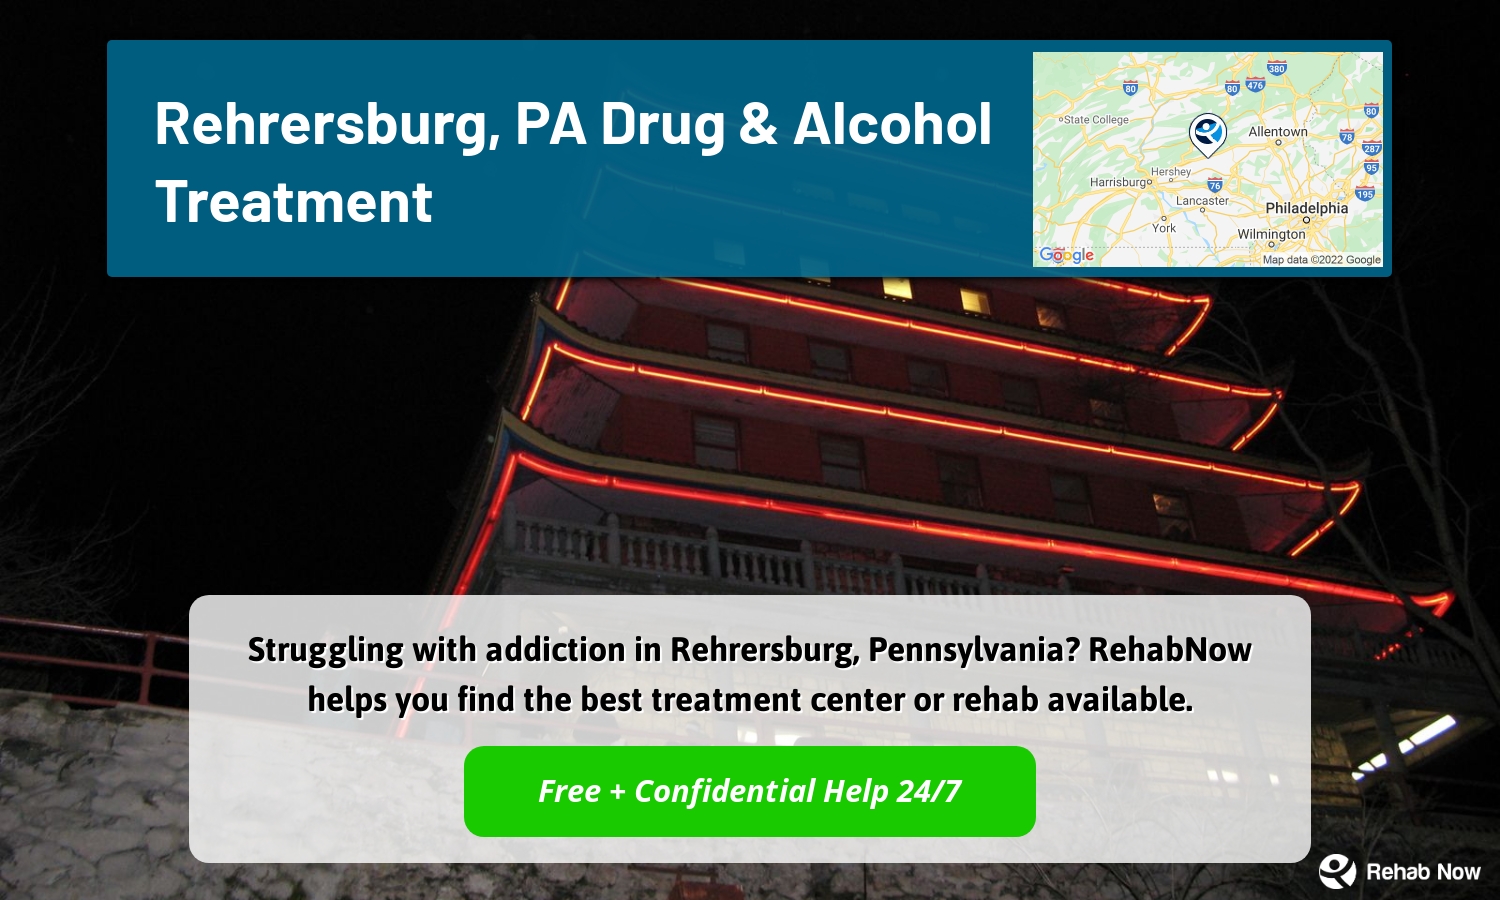 Struggling with addiction in Rehrersburg, Pennsylvania? RehabNow helps you find the best treatment center or rehab available.